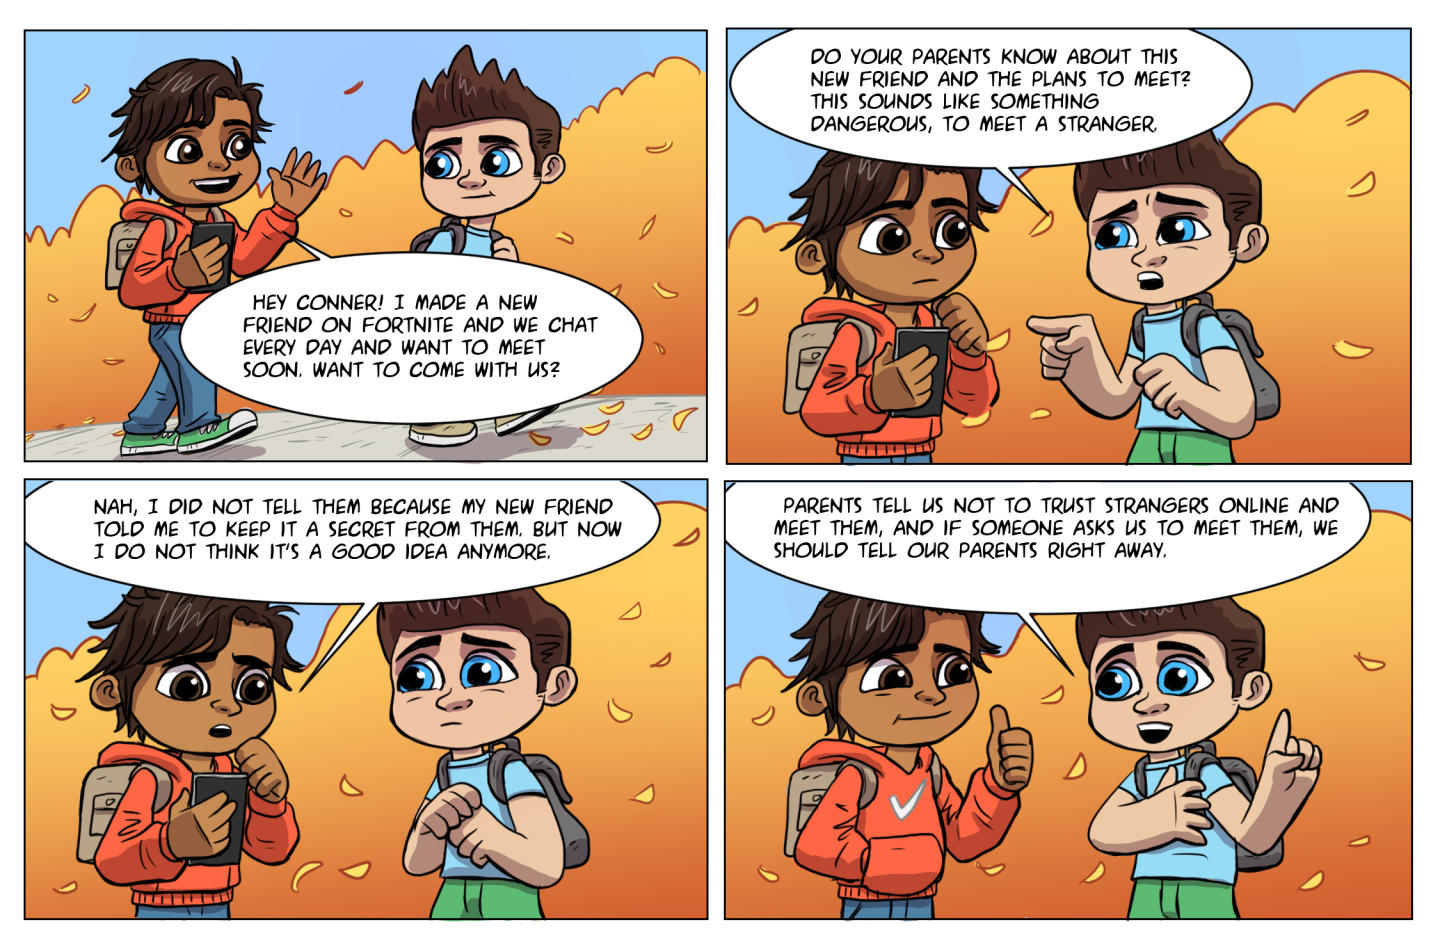 Comic: Let’s be Safe Online, by: Waseem, TELUS Wise footprint Comic Contest